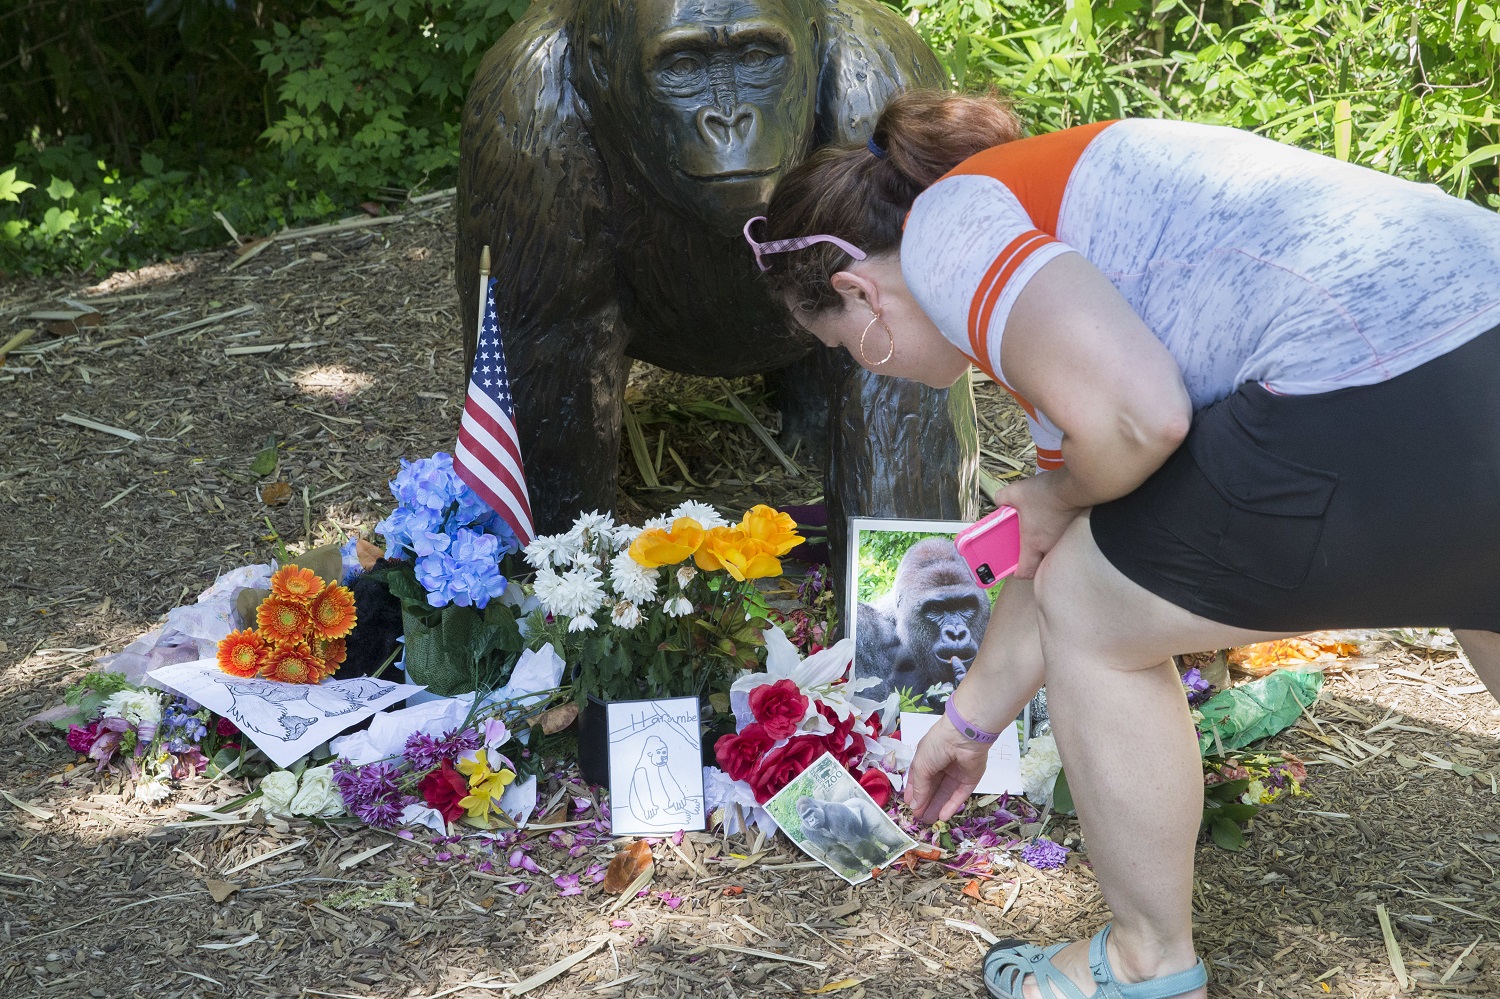 A visitor touches a picture of Harambe, a male silverback gorilla, at a makeshift memorial outside the Gorilla World exhibit at the Cincinnati Zoo &amp; Botanical Garden, Tuesday, June 7, 2016, in Cincinnati. The Cincinnati Zoo reopened its gorilla exhibit Tuesday with a higher, reinforced barrier installed after a young boy got into the exhibit and was dragged by the 400-pound Harambe, which was then shot and killed. (AP Photo/John Minchillo)